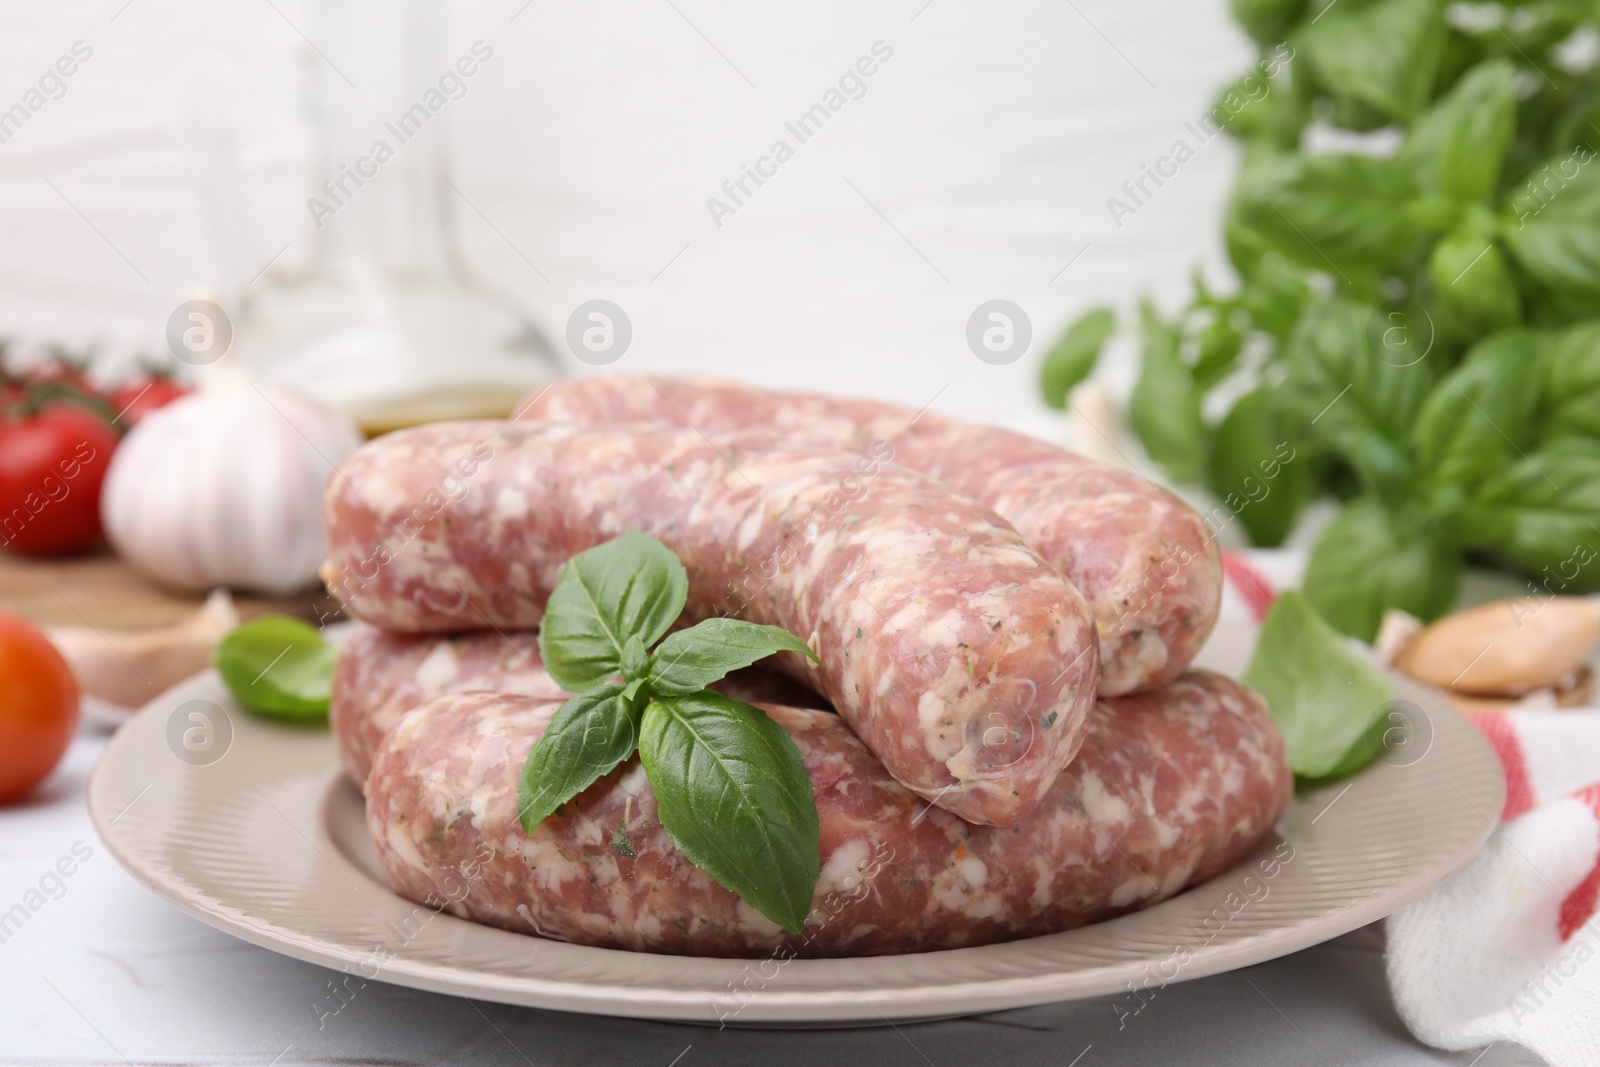 Photo of Raw homemade sausages and basil leaves on white table, closeup